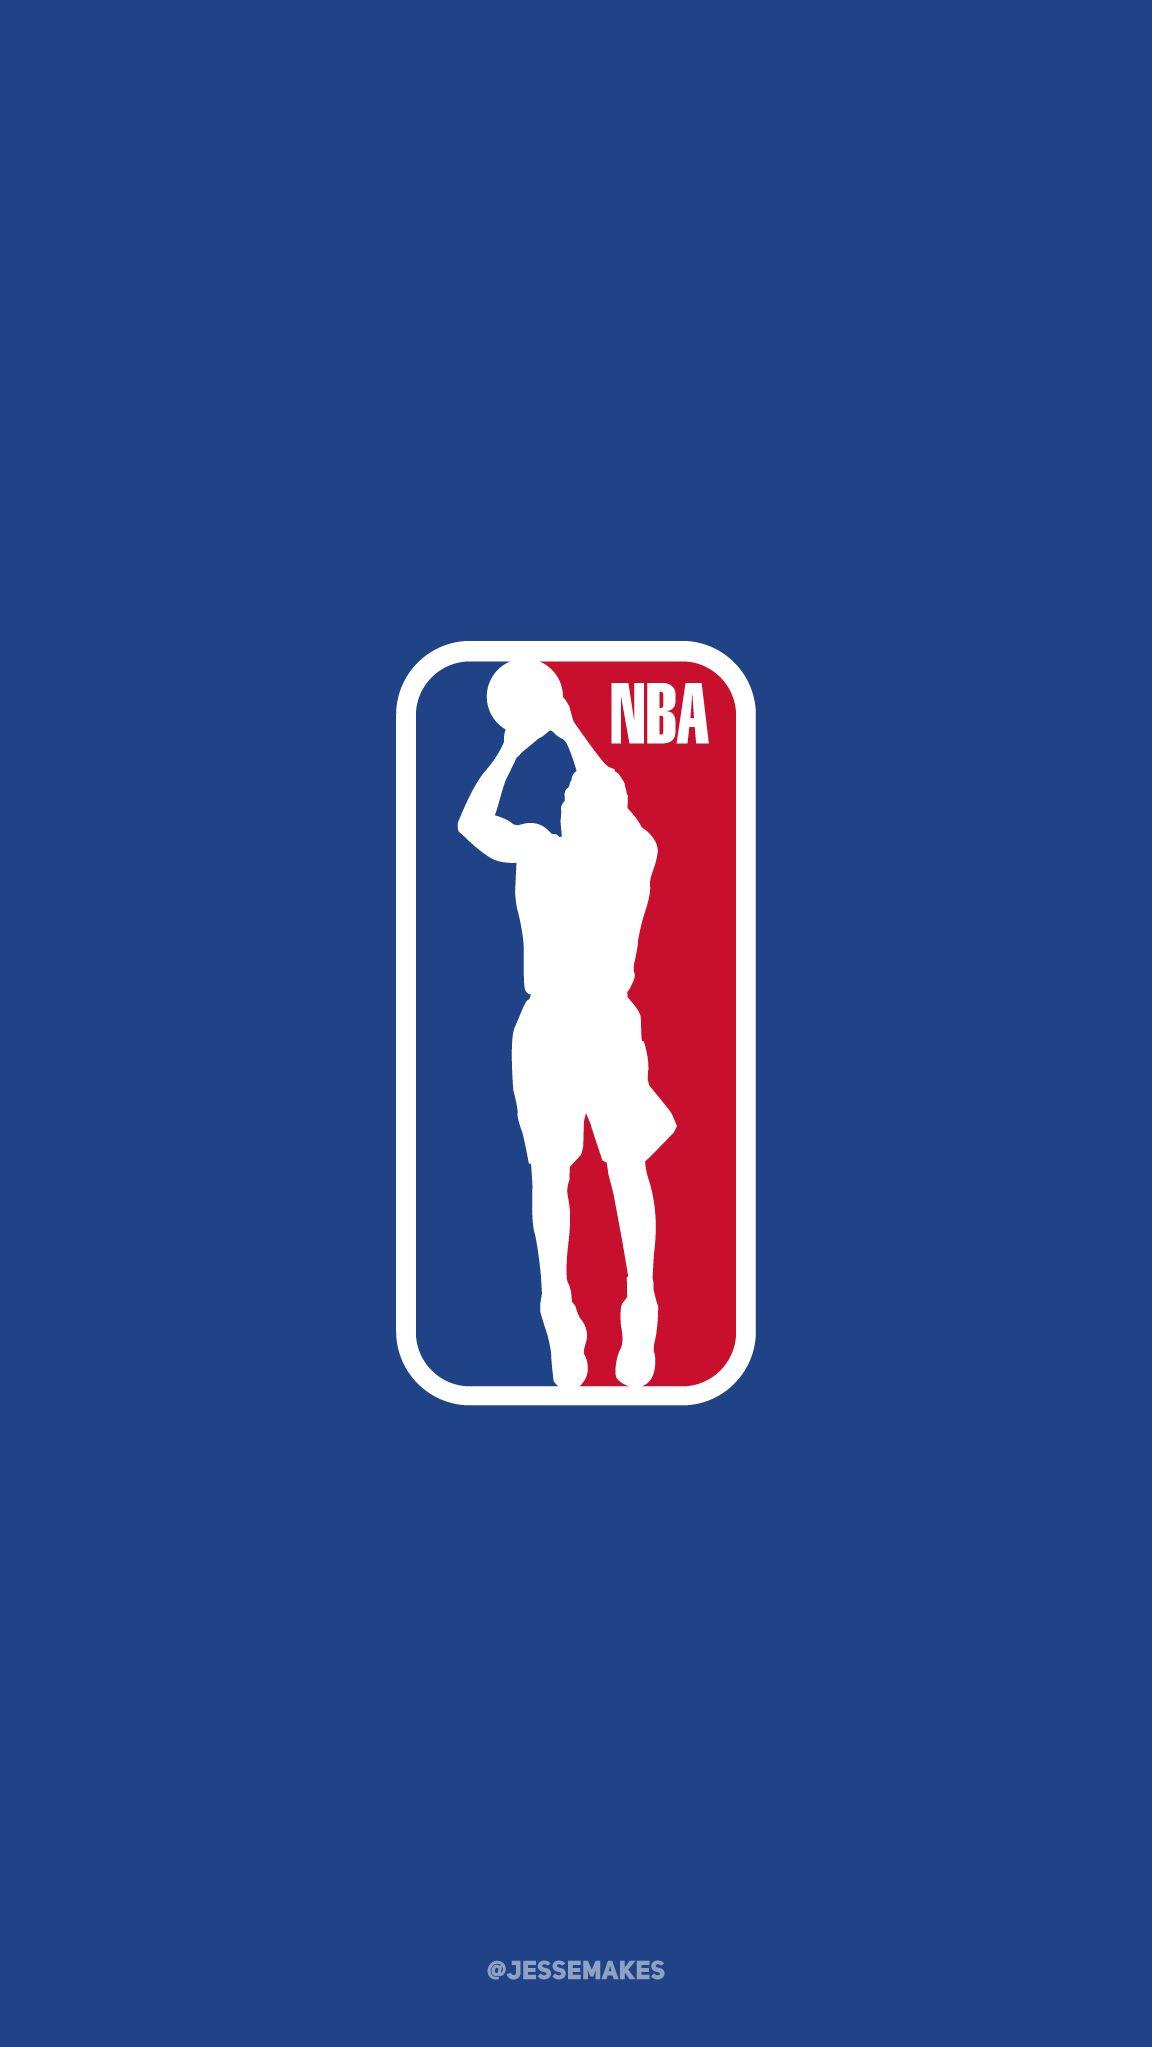 DRose as the subject of the NBA logo. Part of my NBA Logo Redux